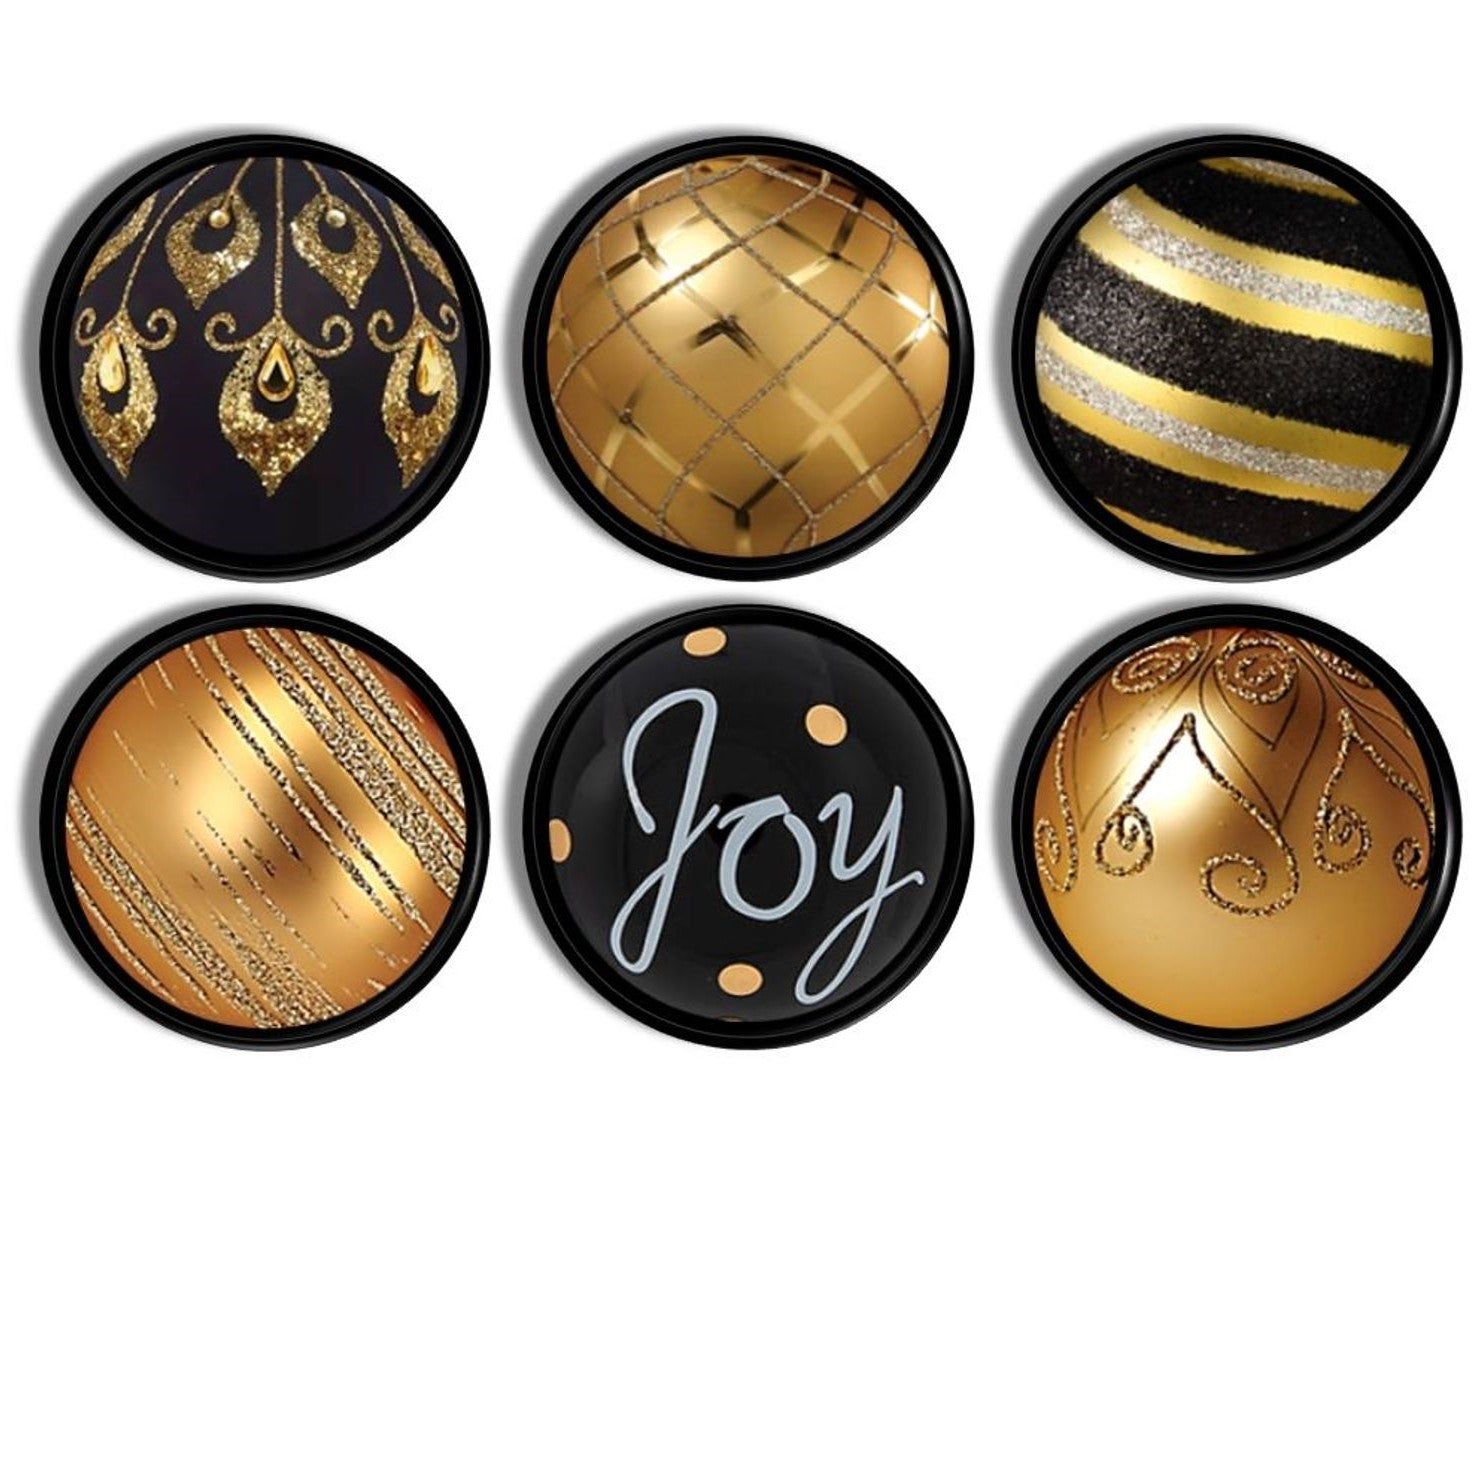 6 Handmade furniture knobs in a unique Christmas holiday theme. Drawer pulls include decorative swirls, stripe, polka dot &quot;joy&quot; designs in black and gold.